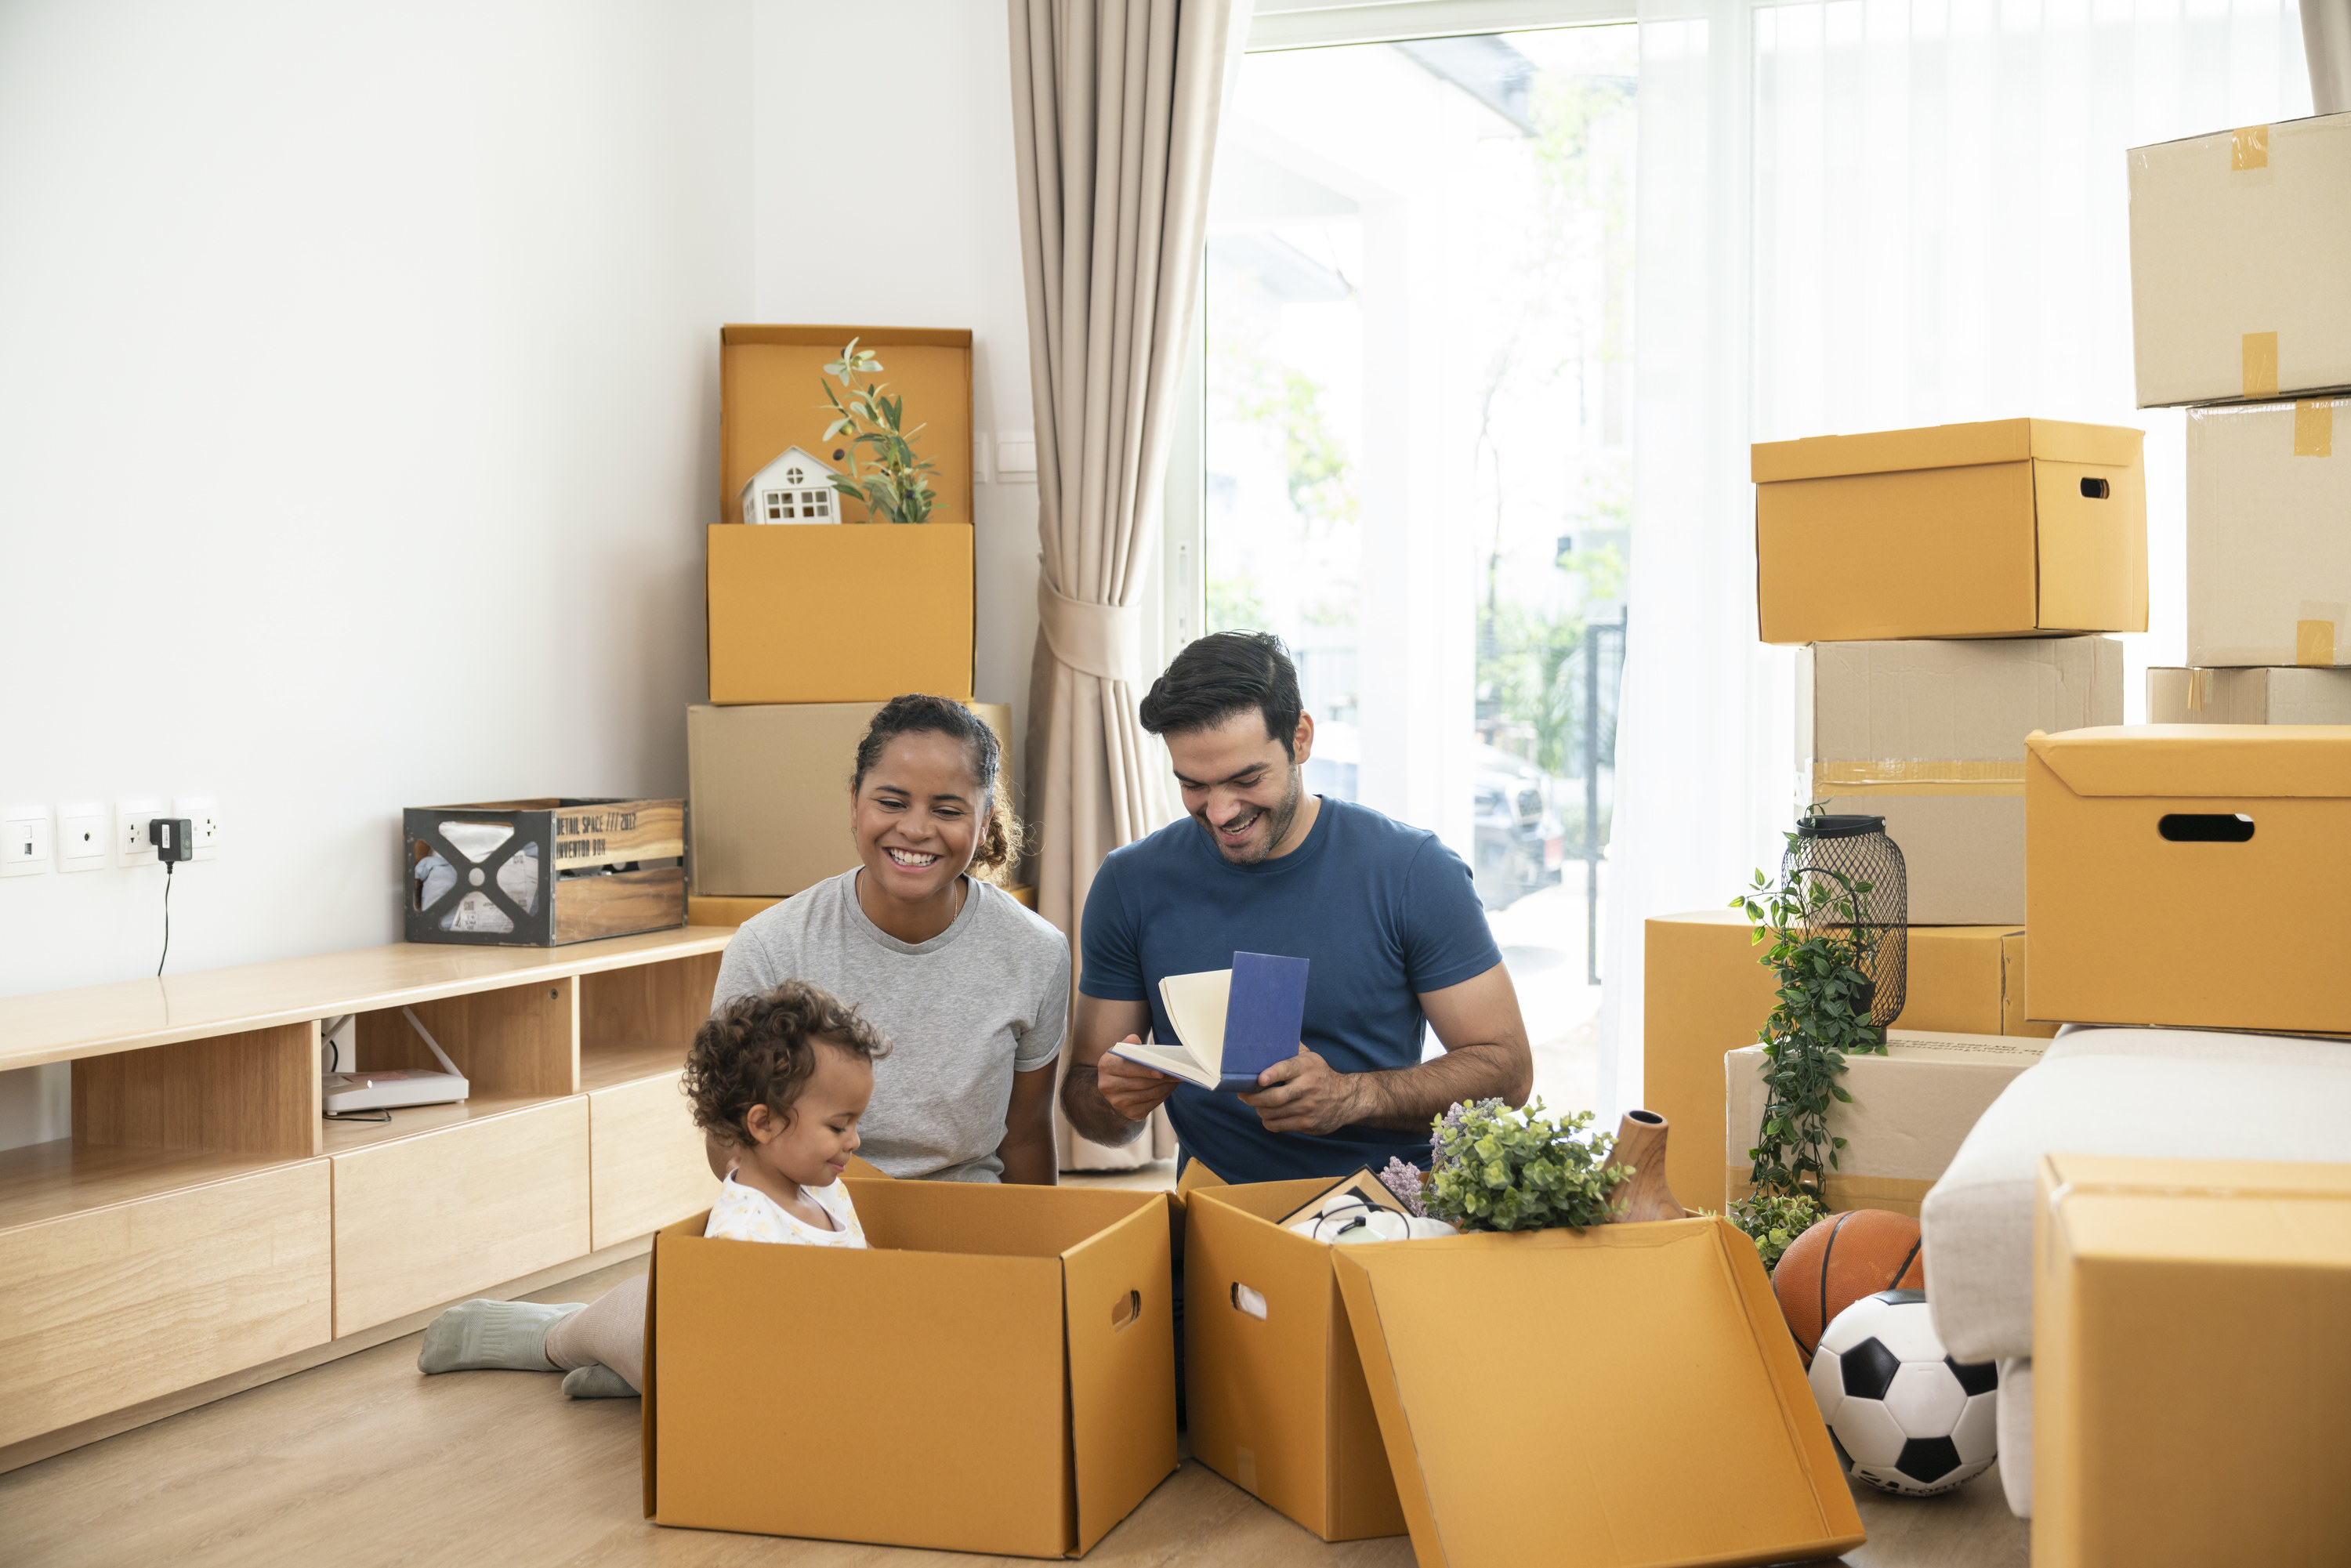 Cheerful Family Moving In New Home